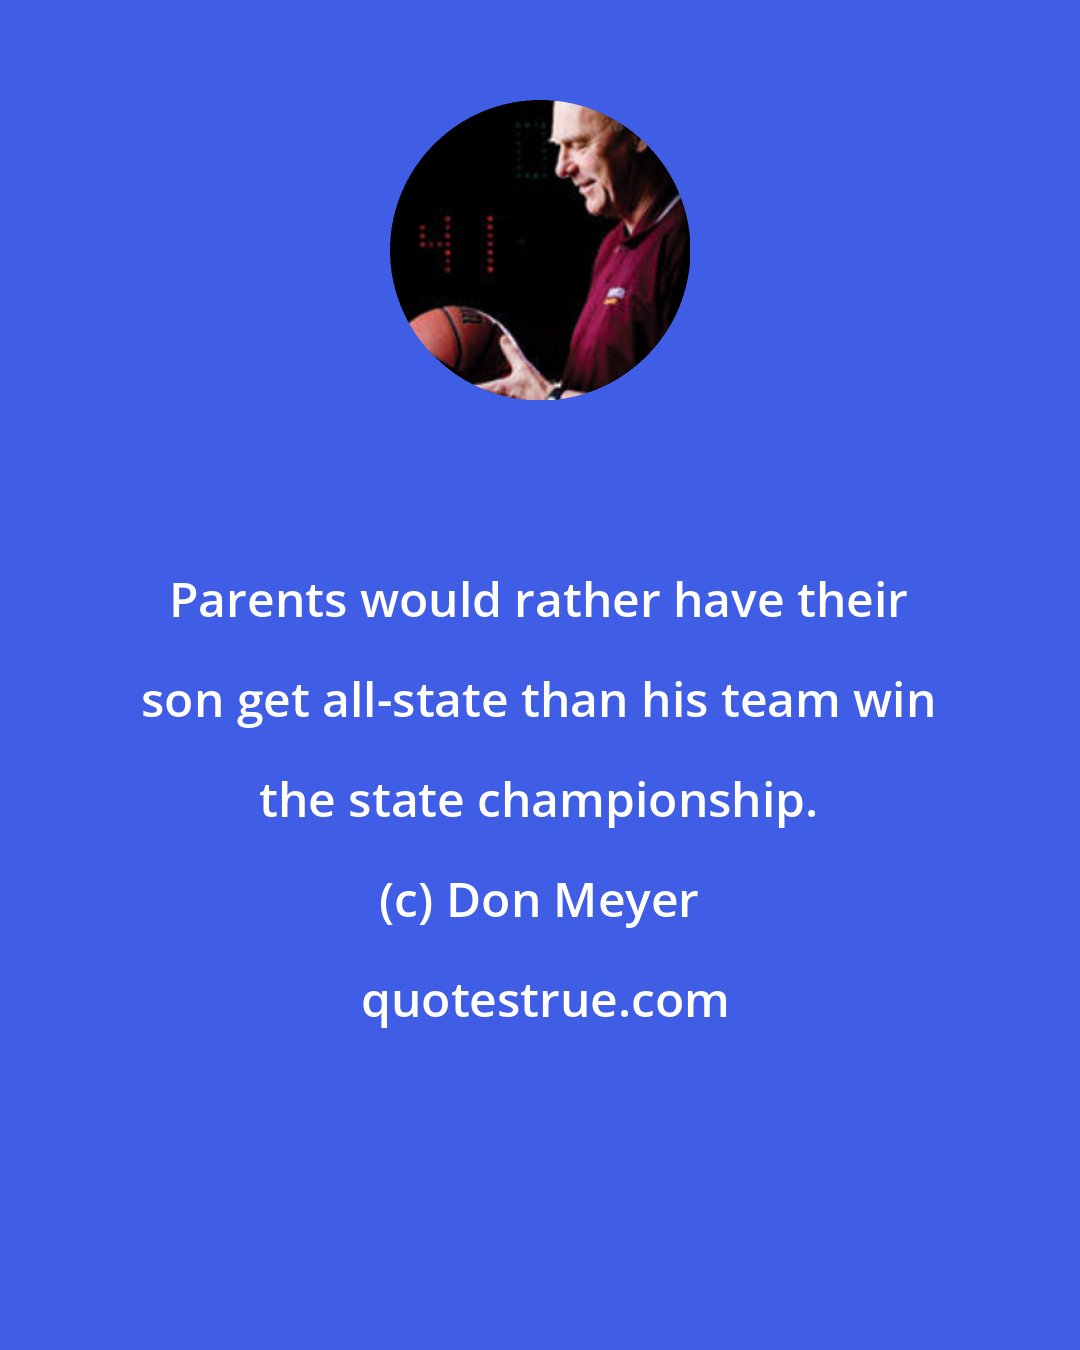 Don Meyer: Parents would rather have their son get all-state than his team win the state championship.